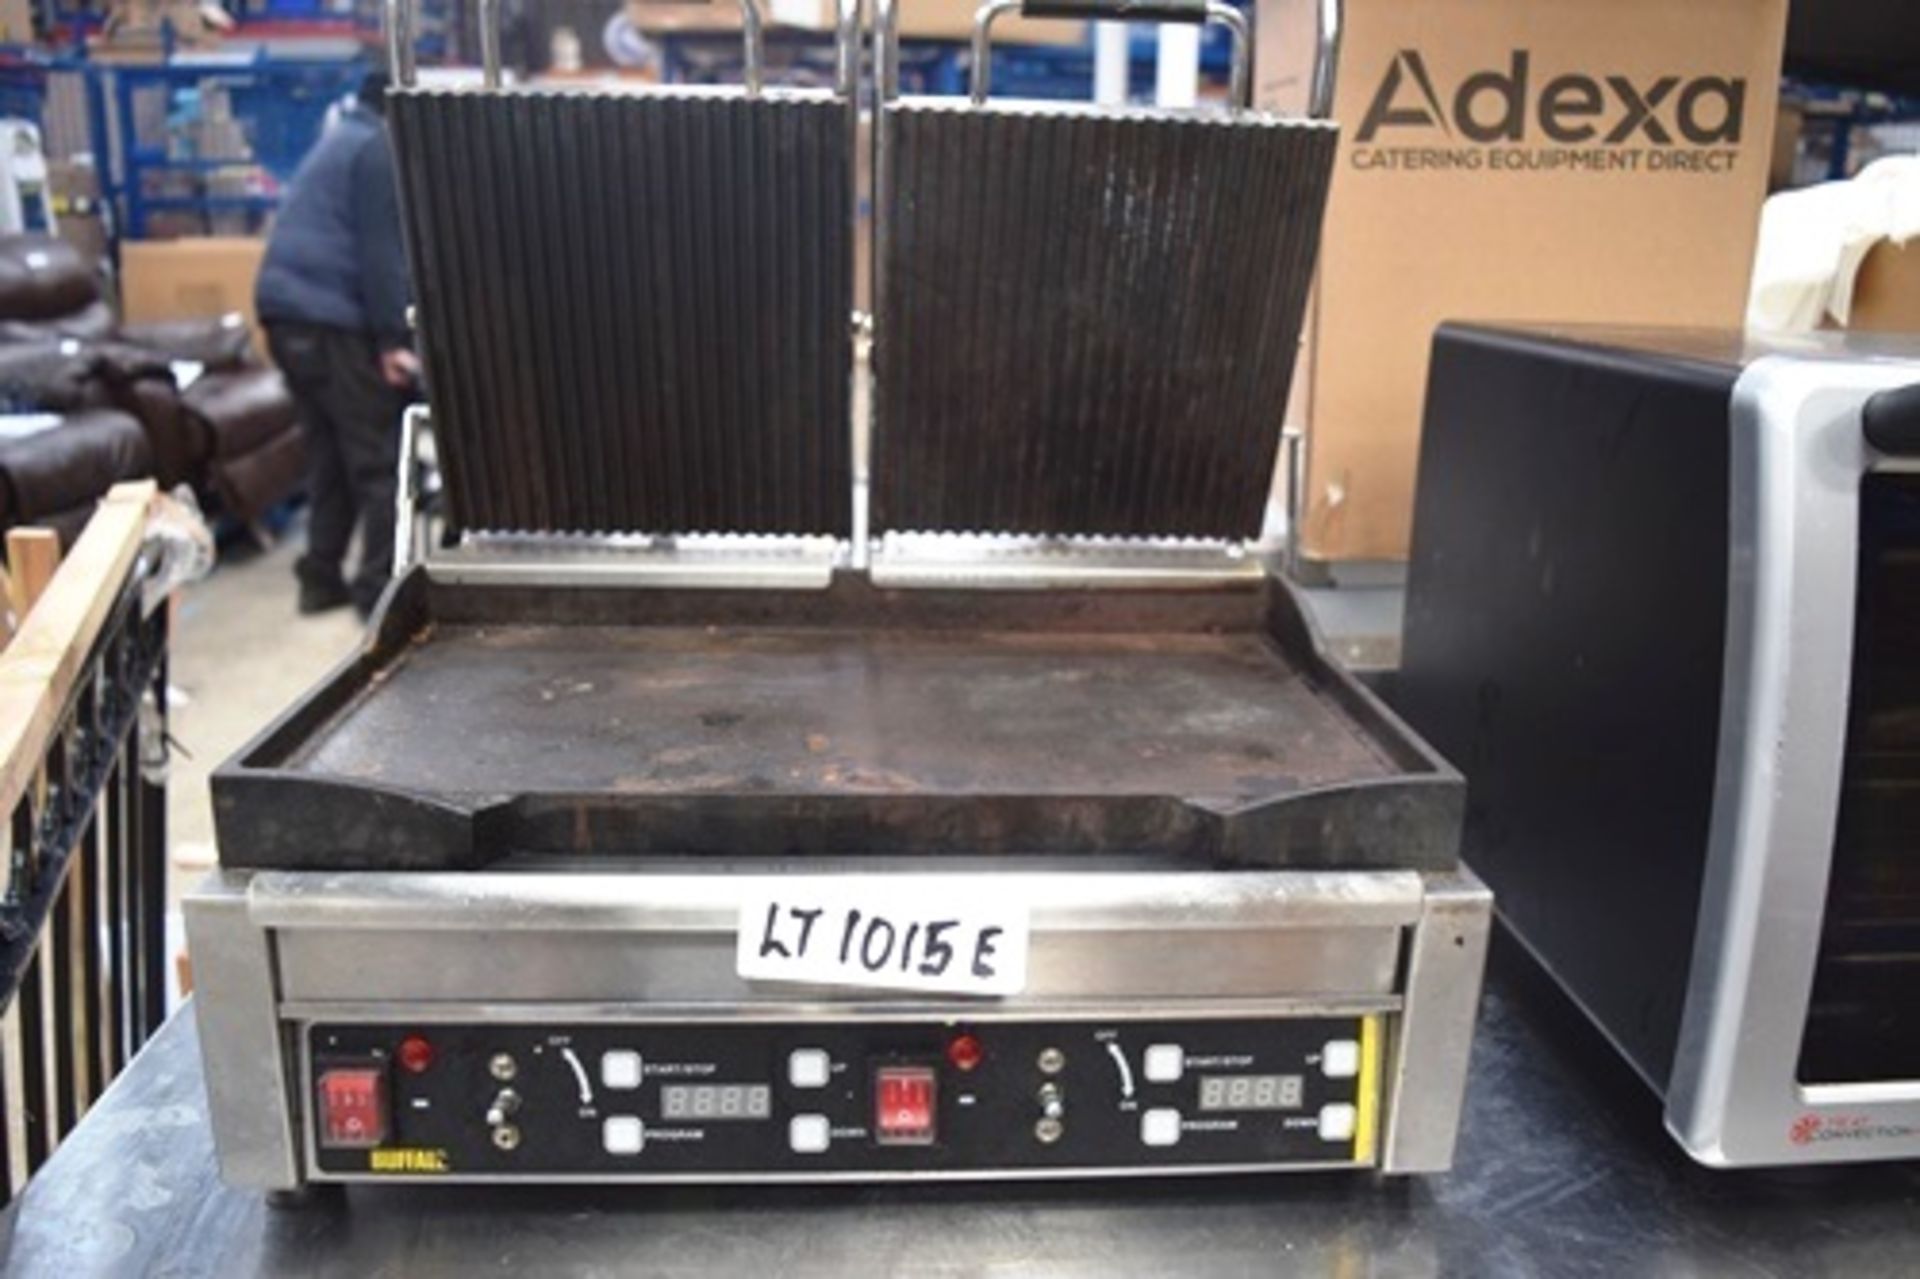 Buffalo double griddle, model L554/B/02, 230V, 2900W - Second-hand (GSF) - Image 2 of 2